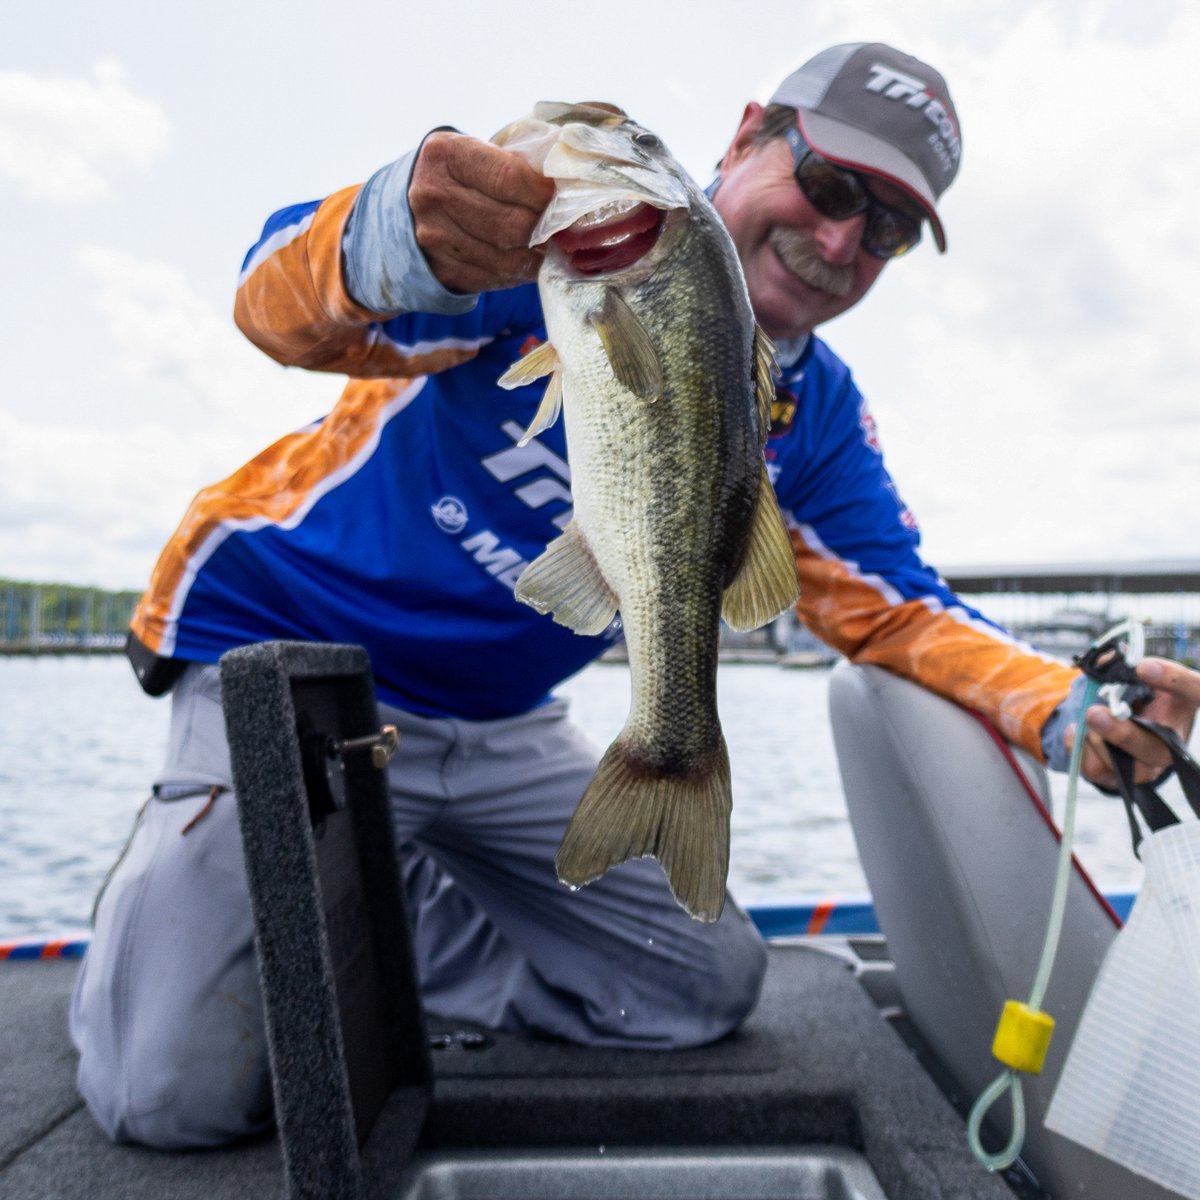 Showing 'em off at Lake Eufaula 👏👏👏 @TackleWarehouse Stop 4 Presented by E3 Sport Apparel was lights out on Day 1. Tune in tomorrow morning bright and early for all the live coverage at MajorLeagueFishing.com and on the MLF app. majorleaguefishing.com/invitationals/… #eufaulachamber